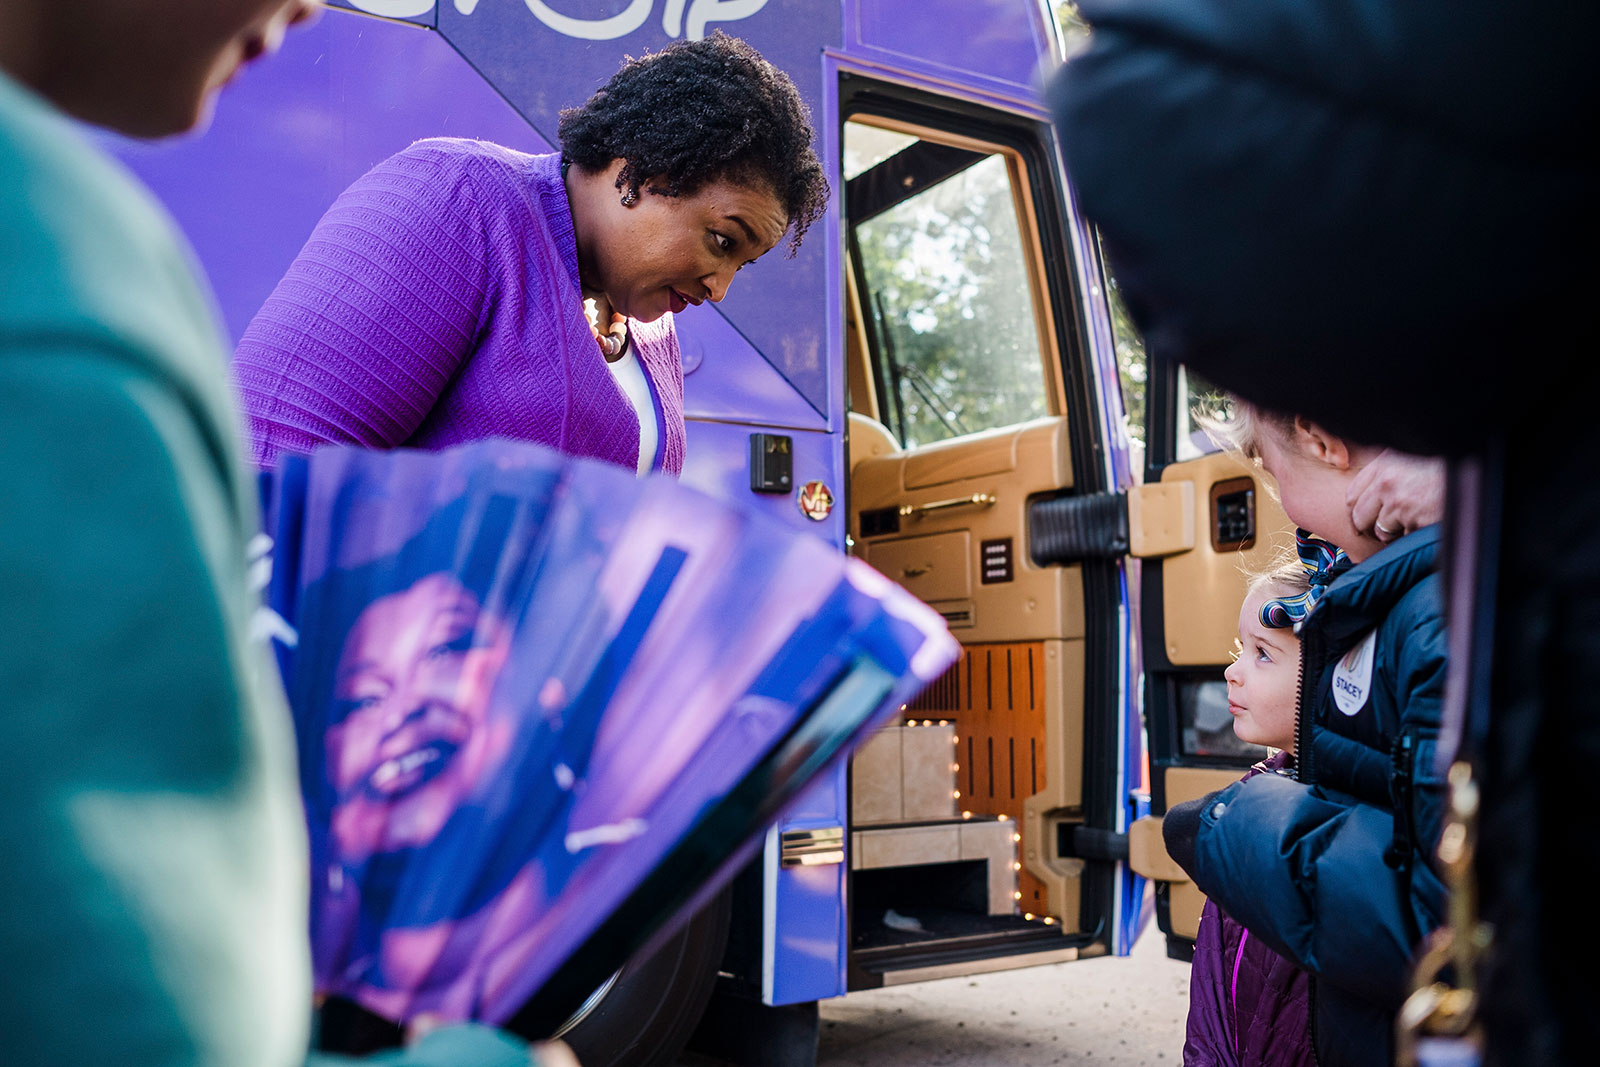 Stacey Abrams, Georgia's Democratic nominee for governor, greets young attendees during a campaign stop in Jonesboro, Georgia, on Oct. 18. The Georgia gubernatorial race is a rematch of 2018, when Republican Brian Kemp narrowly defeated Abrams.